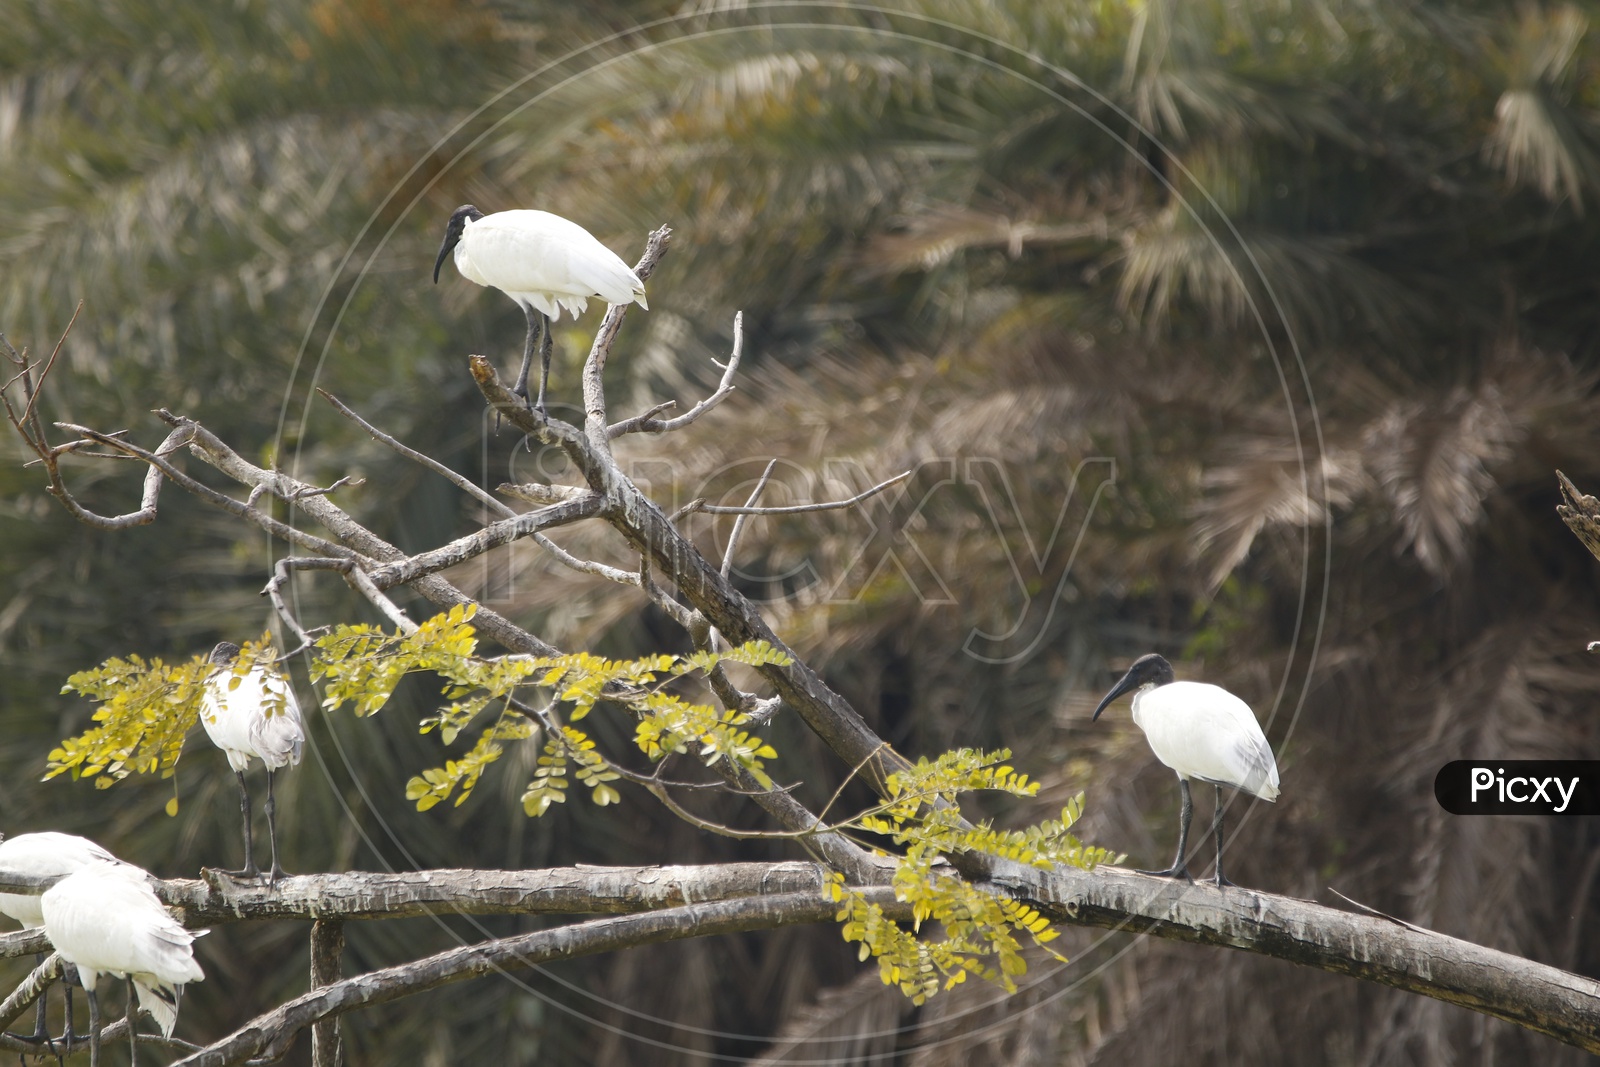 Bunch of Great egrets